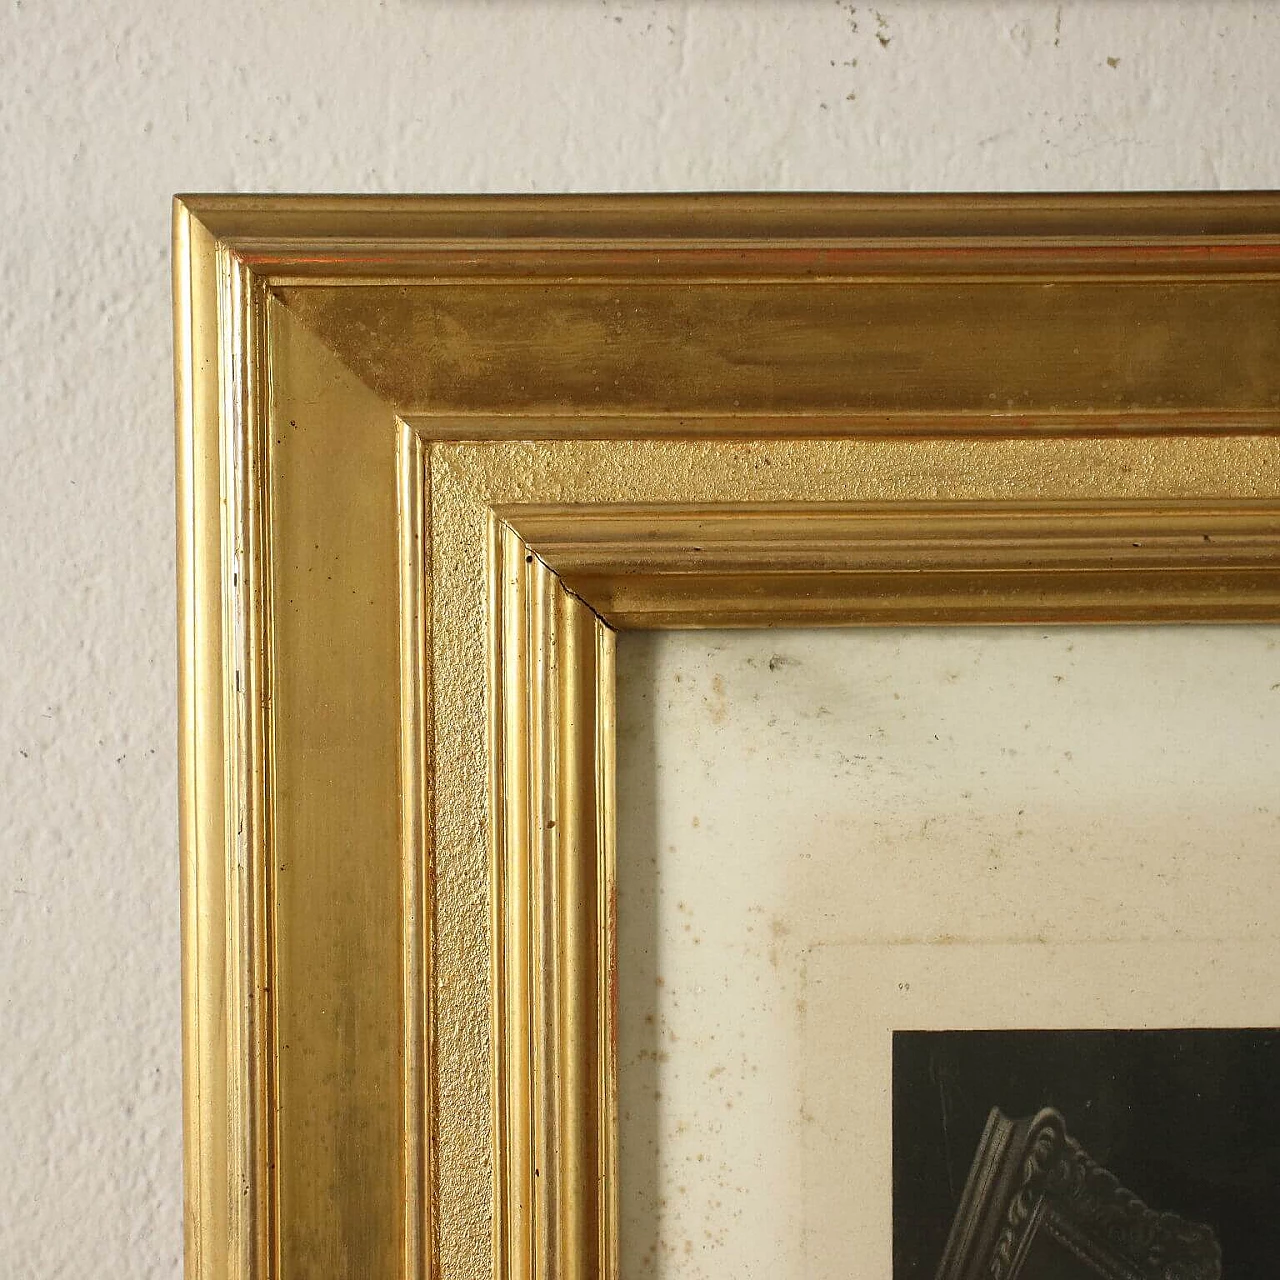 Group of 4 gilded frames with prints, 19th century 3